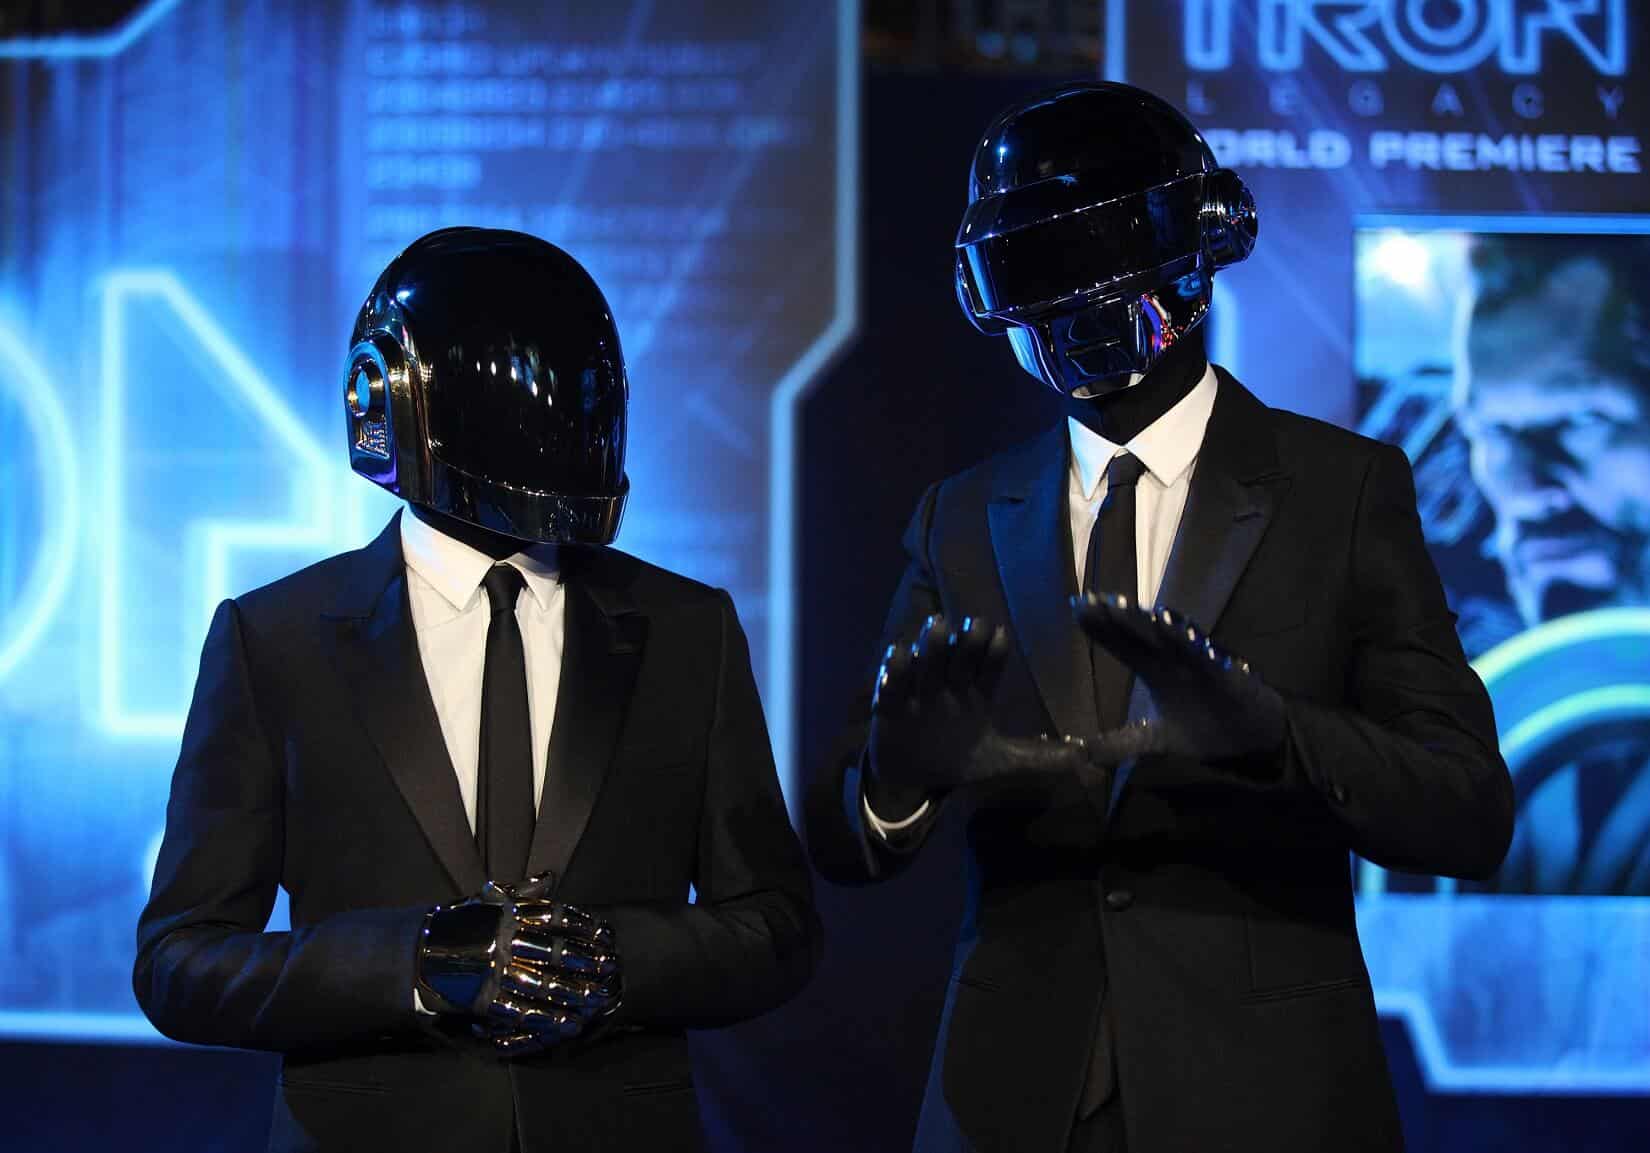 Daft Punk classic album ‘Homework’ is one of Discogs’ best selling albums of 2022